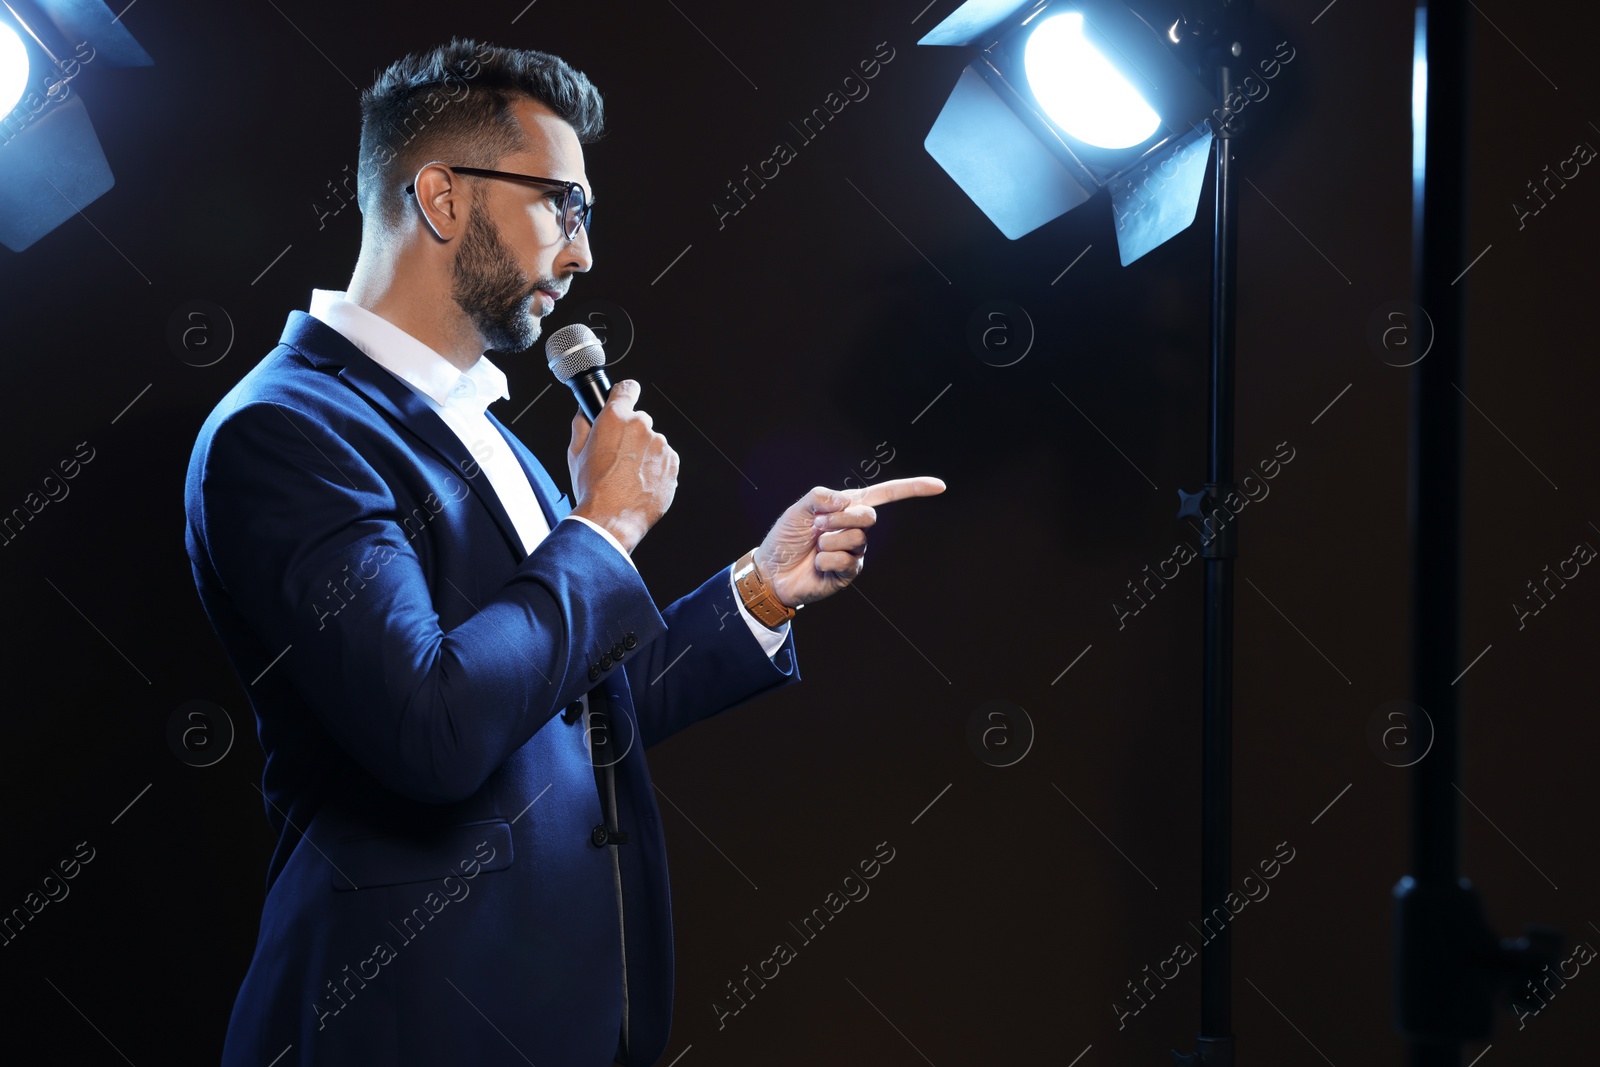 Photo of Motivational speaker with microphone performing on stage. Space for text